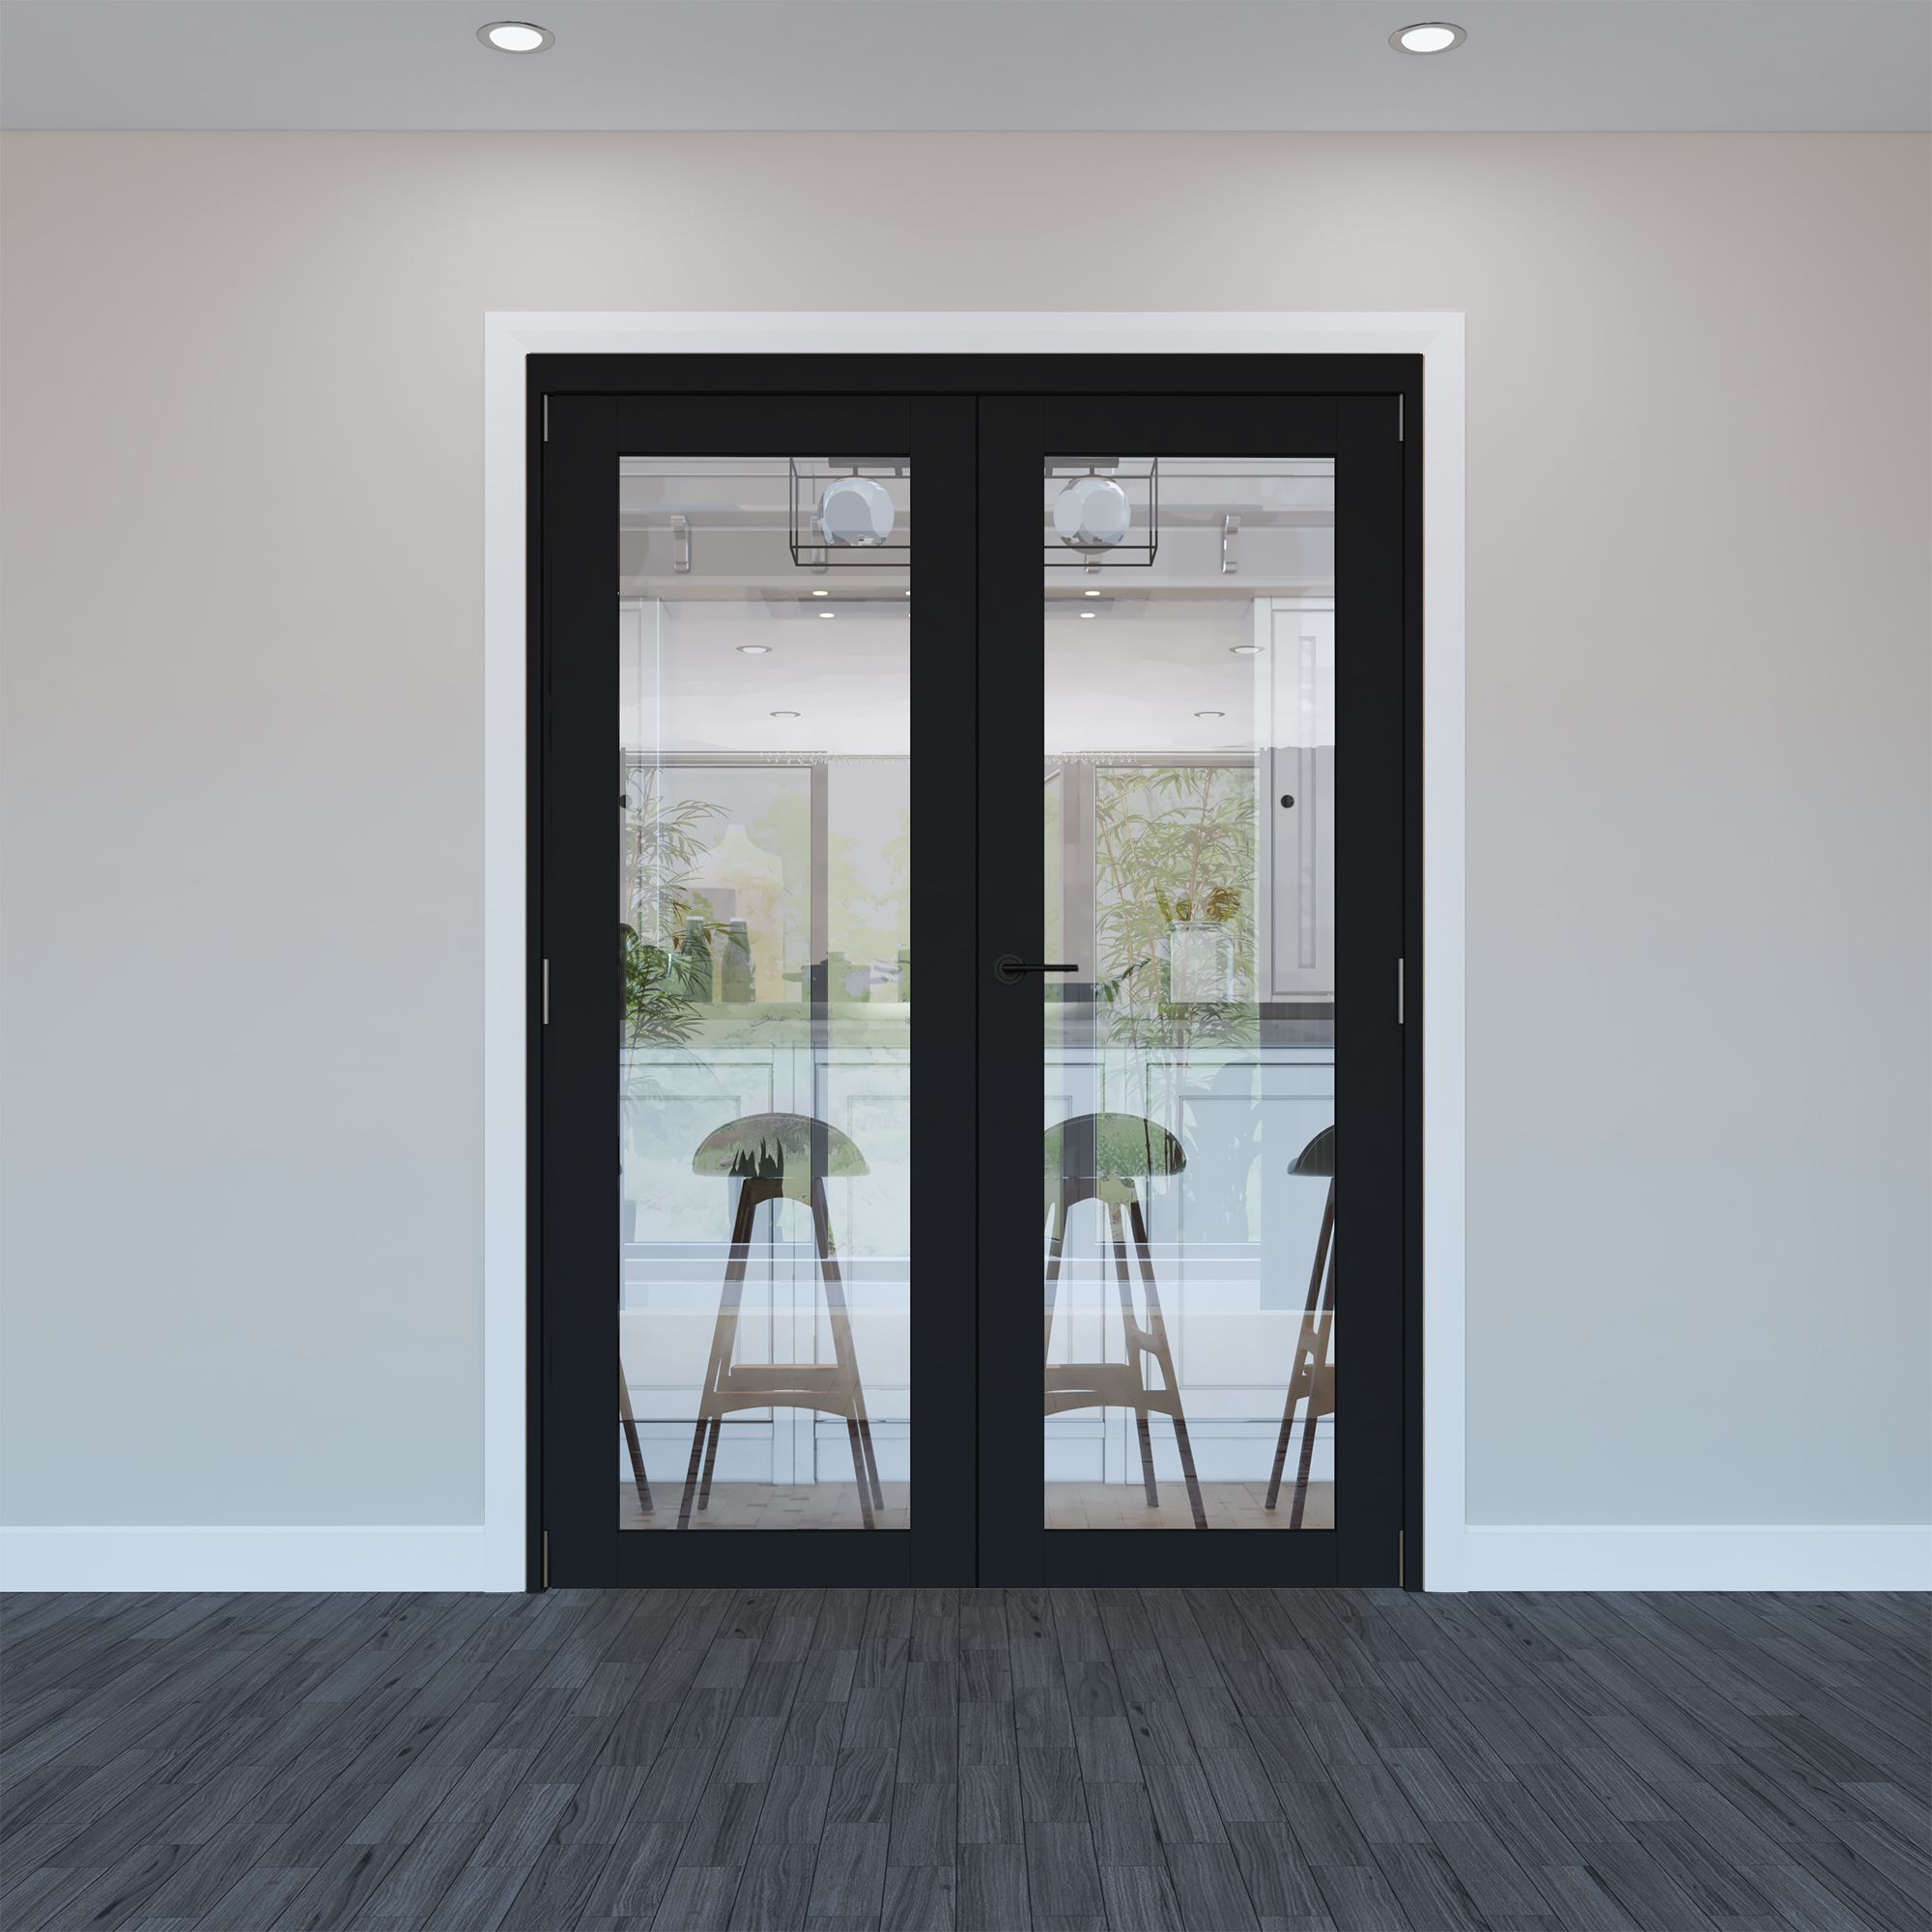 1 panel 1 Lite Clear Fully glazed Timber Black Internal French door set 2017mm x 133mm x 1445mm - Fully Finished